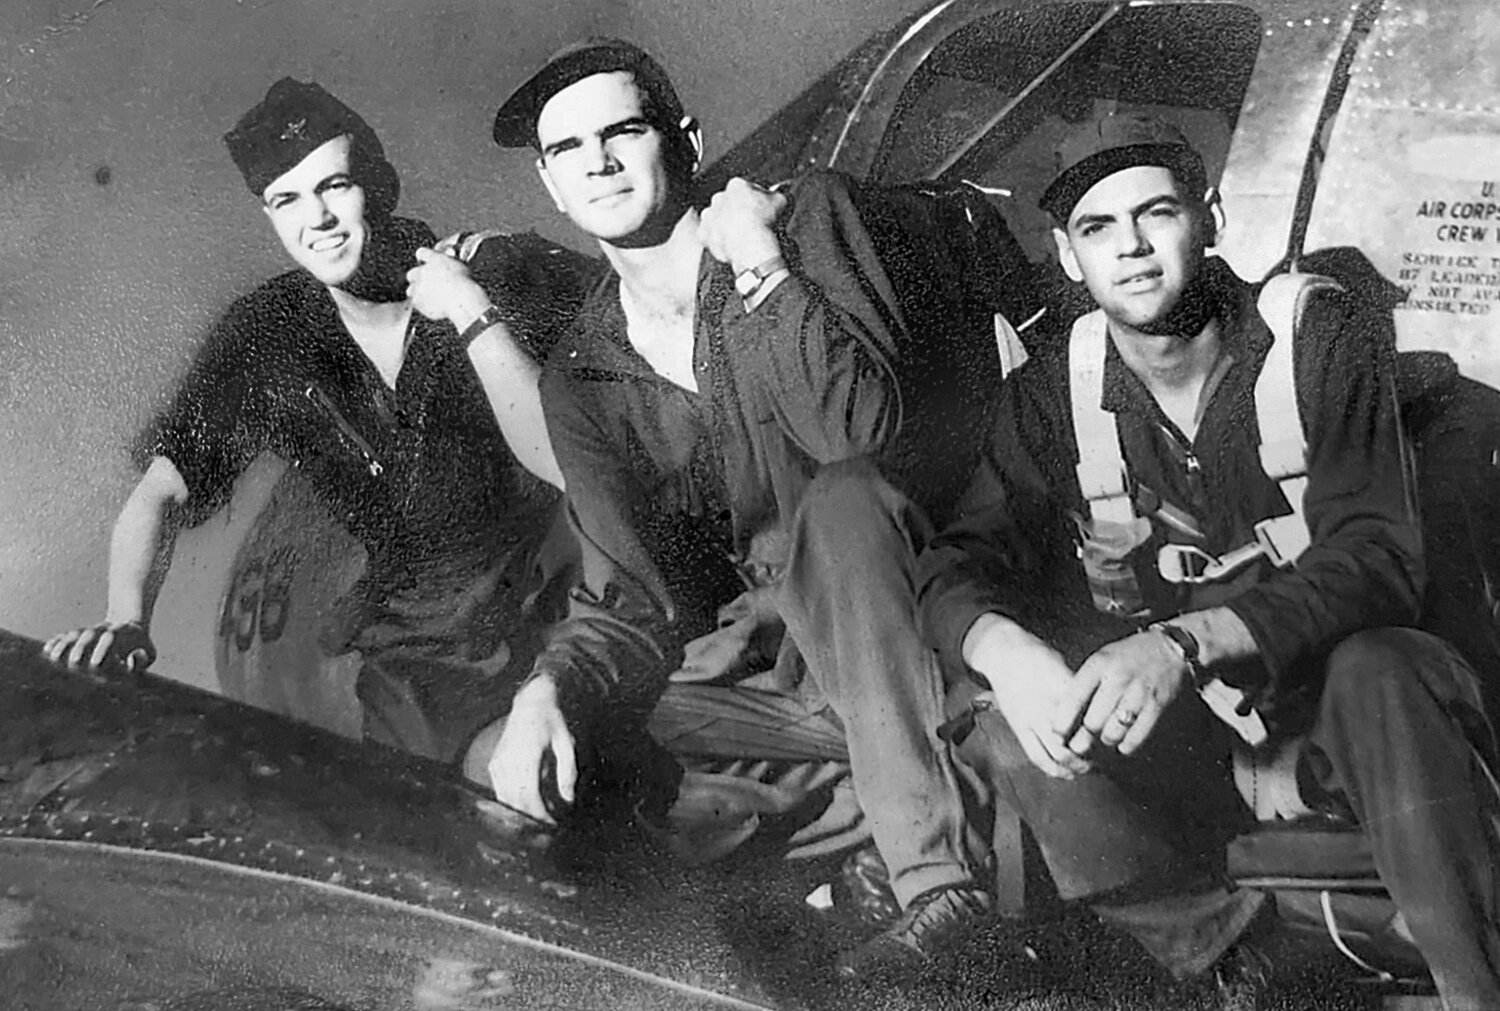 Don Buswell, center, is pictured during his time in the Air Force in this photo he provided to The Chronicle.